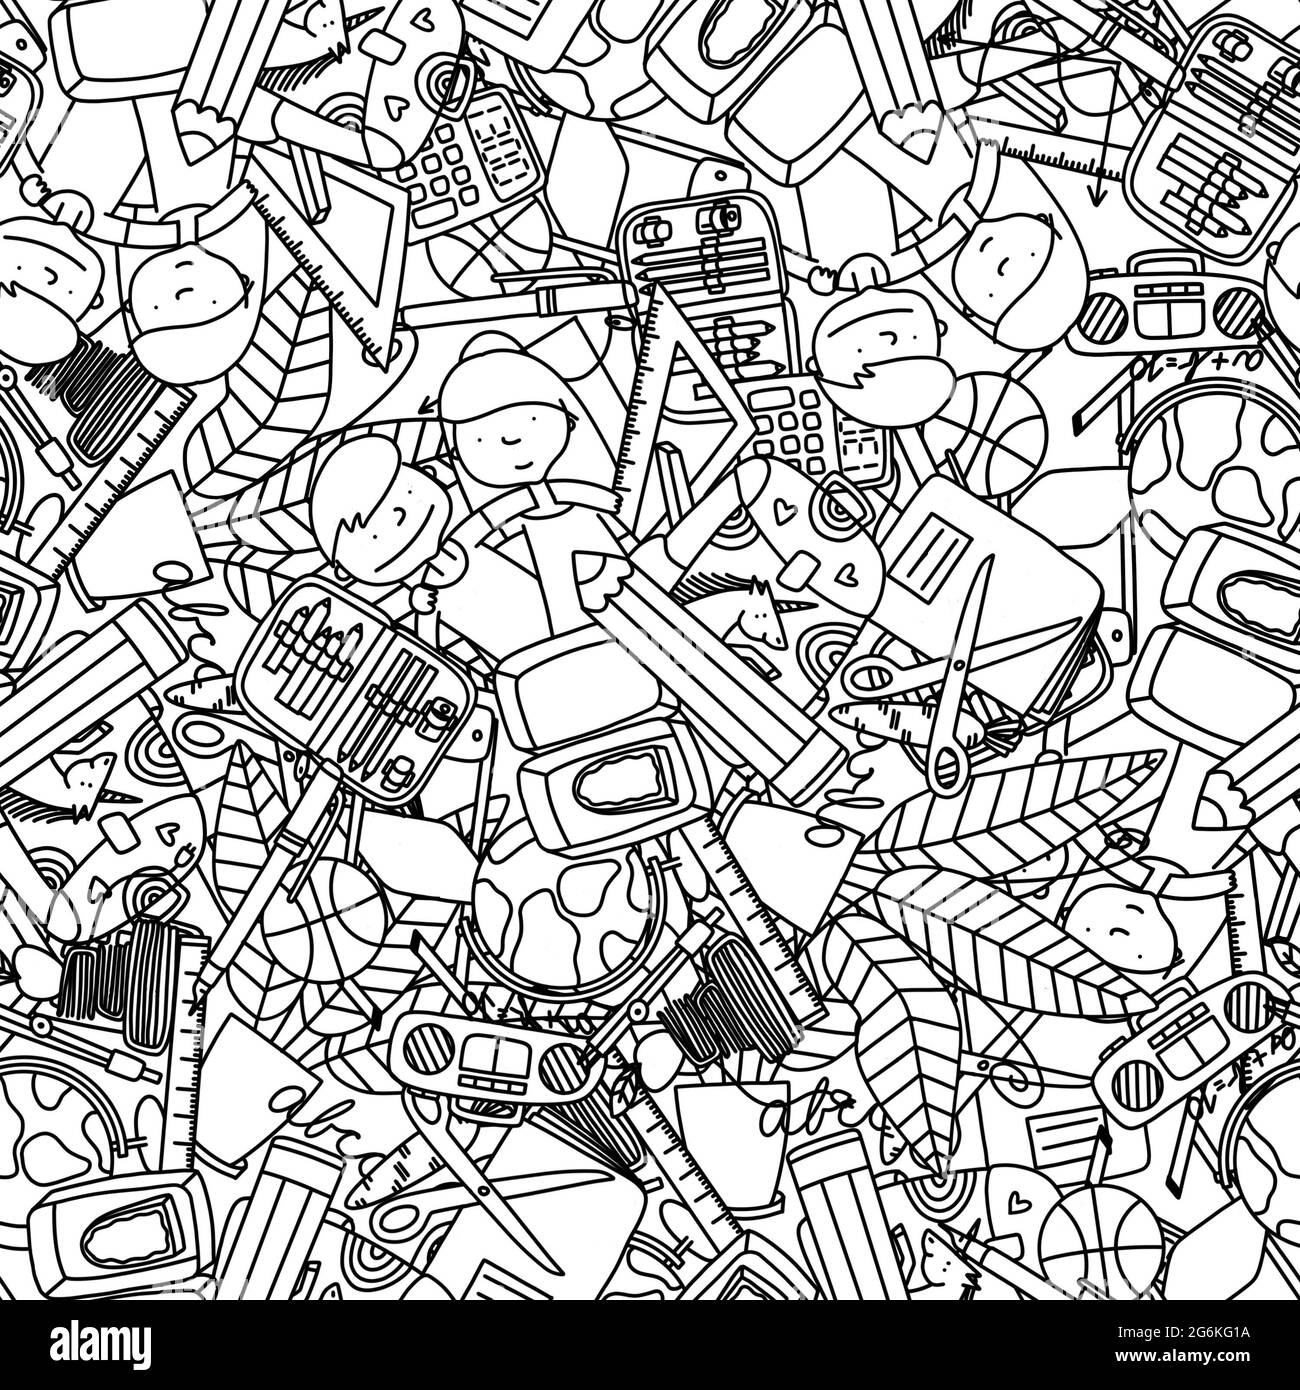 Seamless pattern designed to occasion of the return to the school after holidays. Doodle with Back to School Theme. Stock Photo